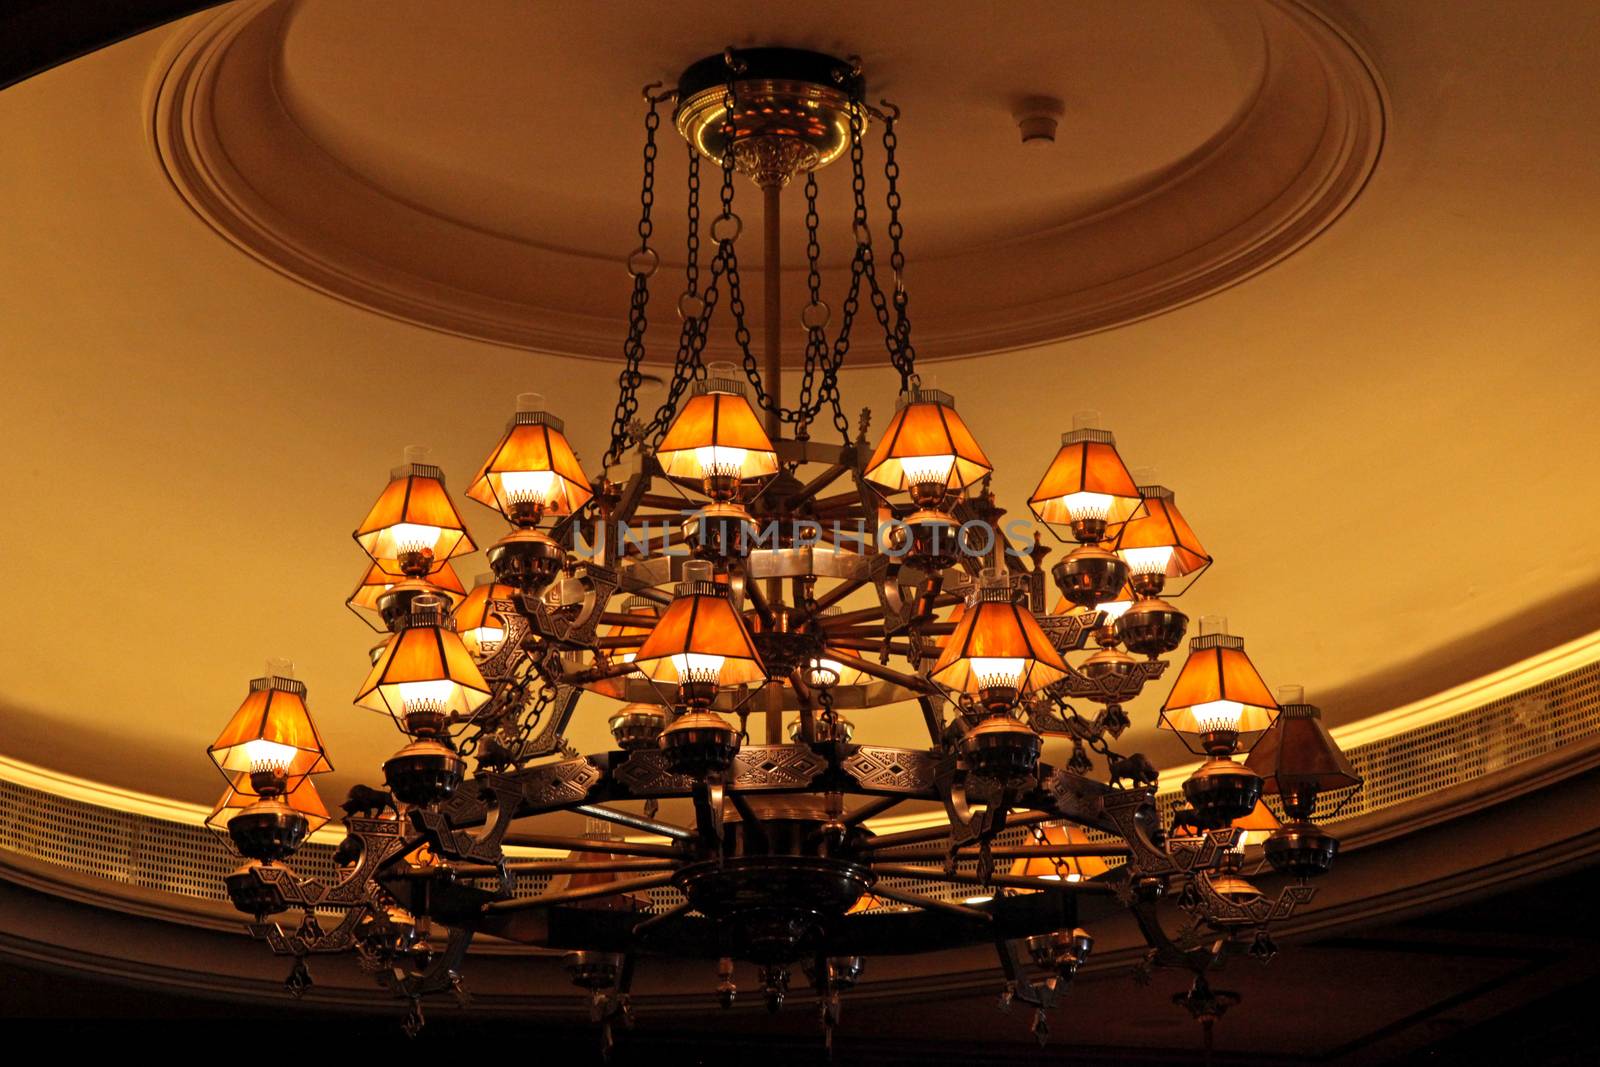 A large vintage light hanging from the ceiling